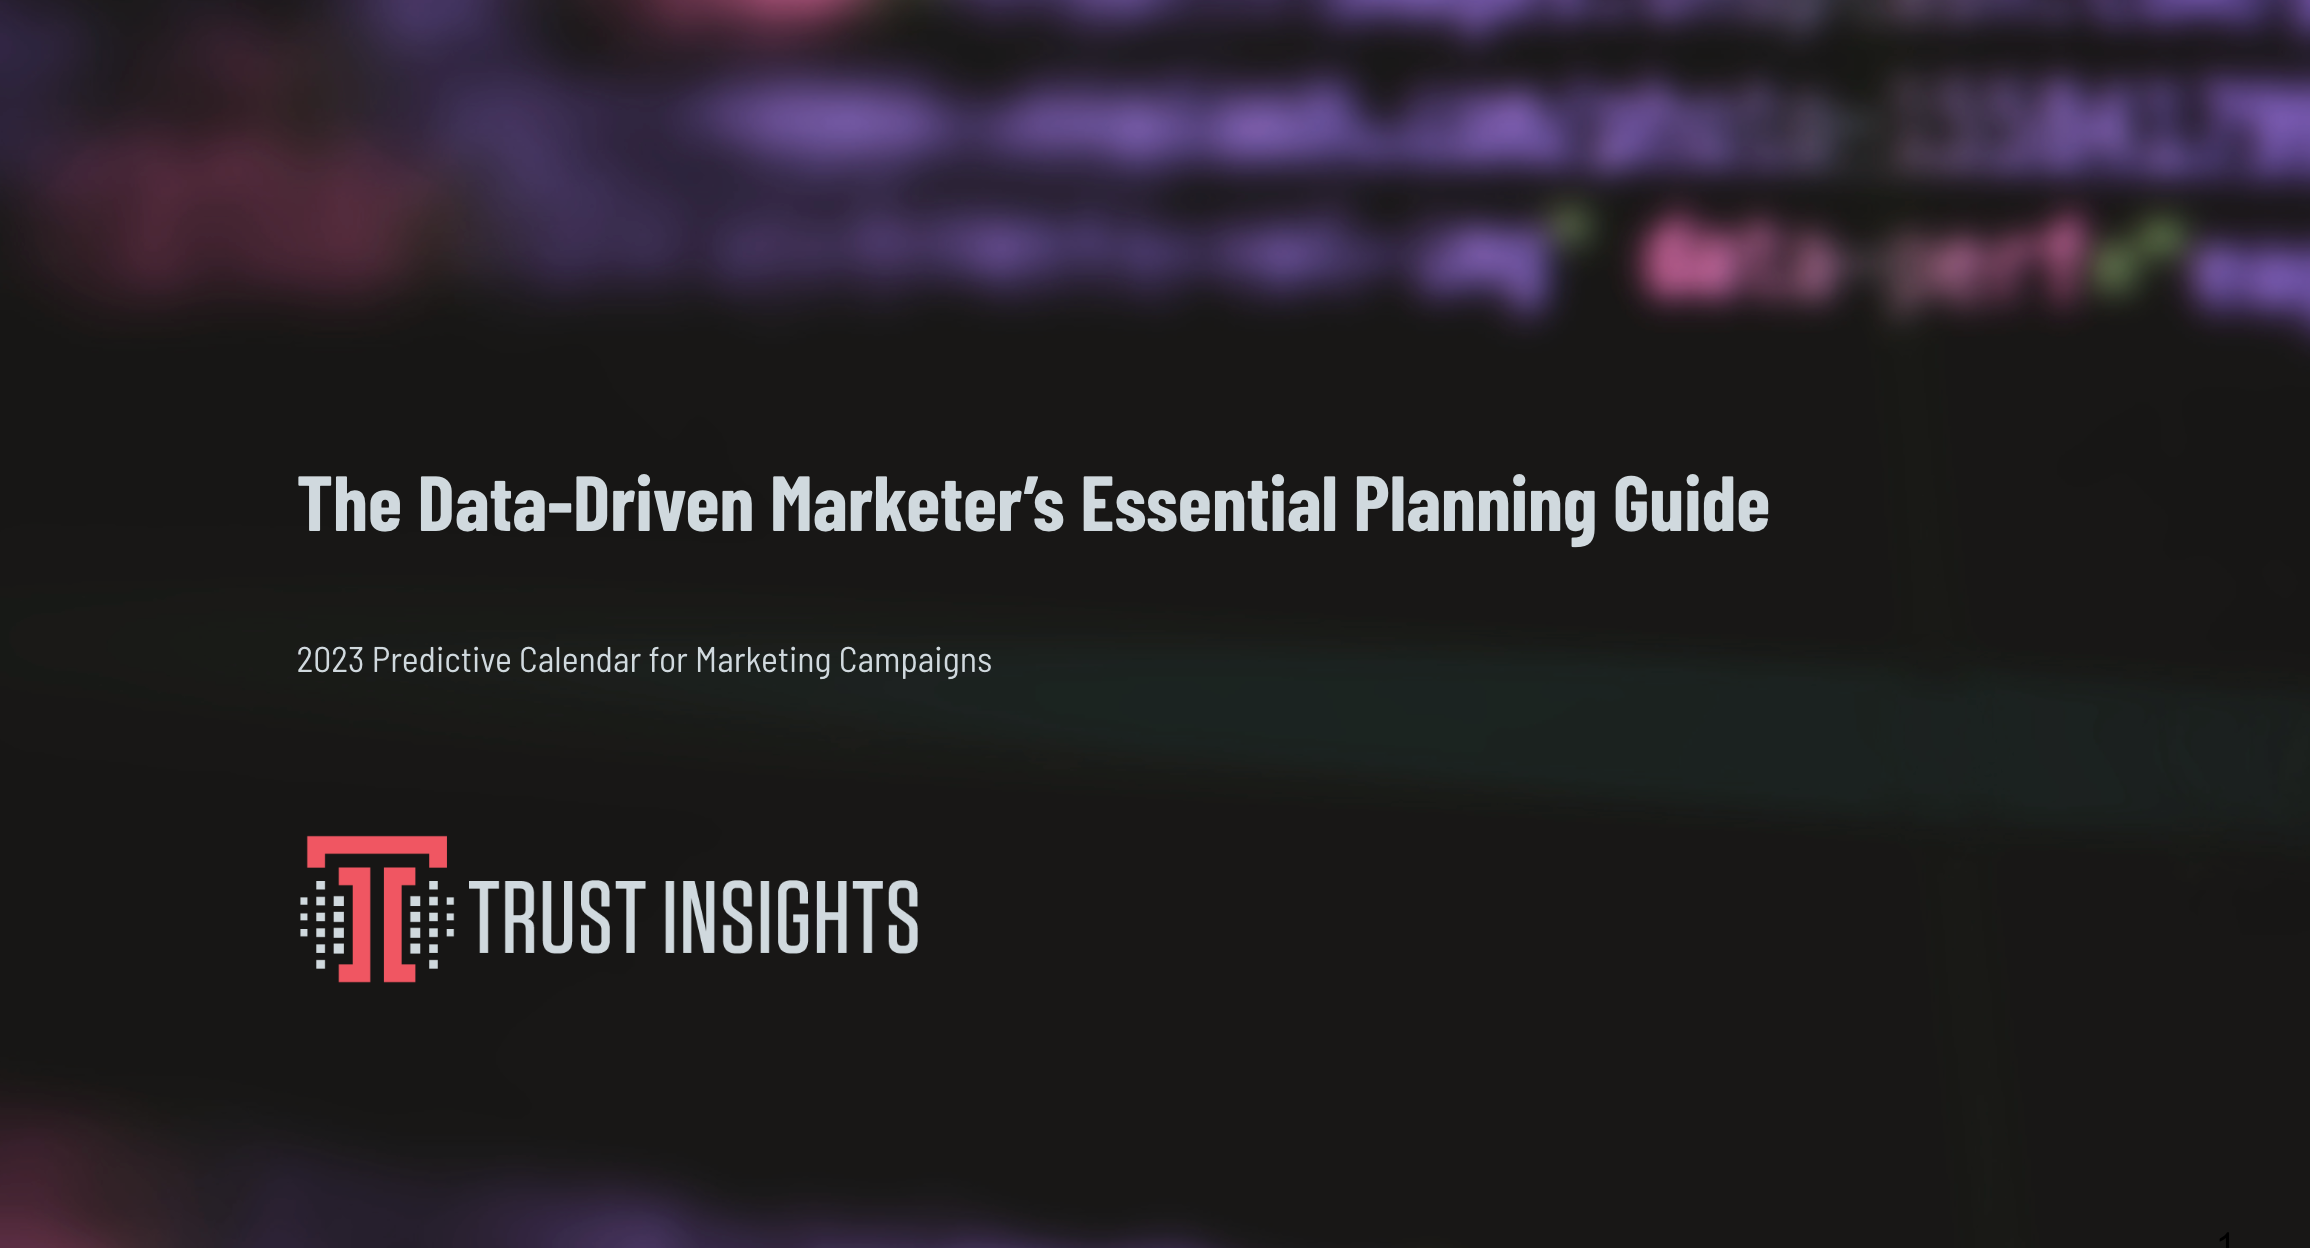 The B2B Marketer's Essential Planning Guide for 2022